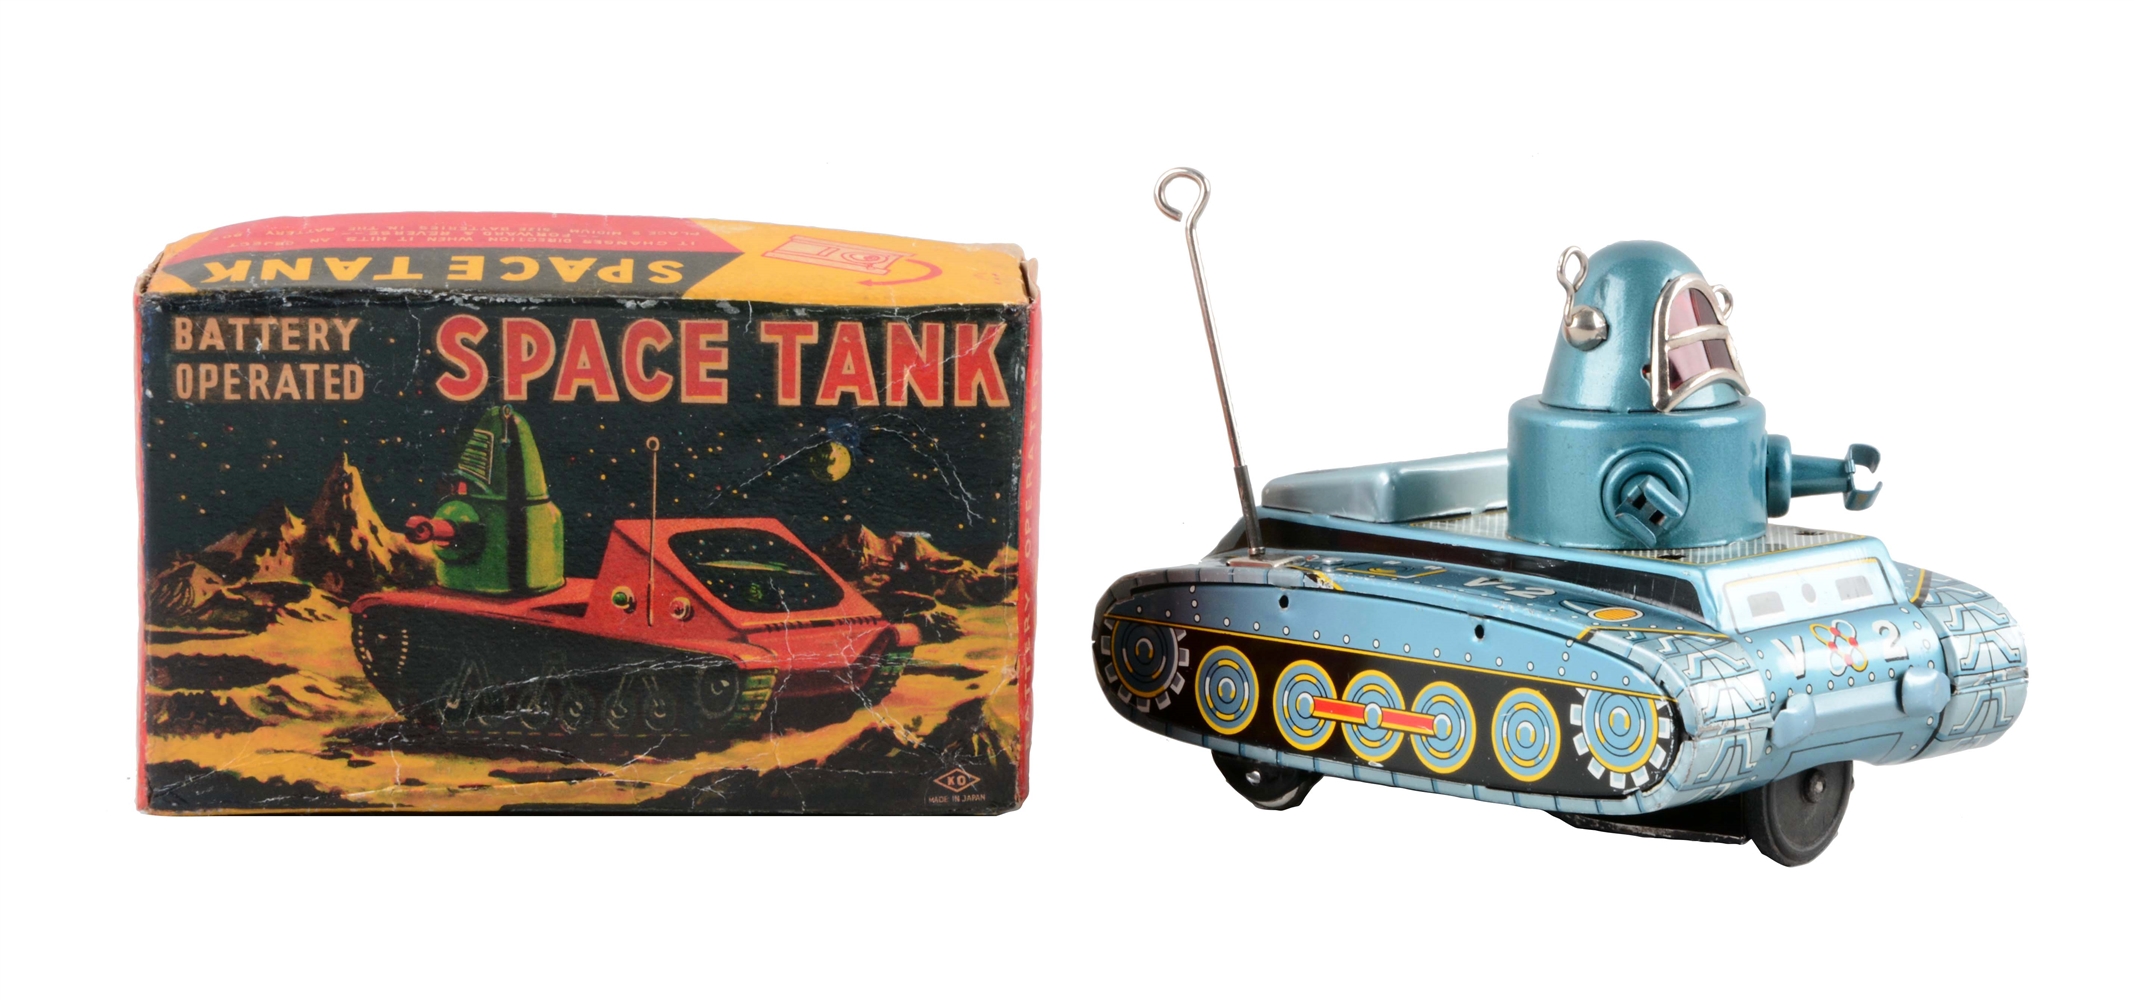 JAPANESE TIN LITHO BATTERY-OPERATED V2 ROBBY SPACE TANK.